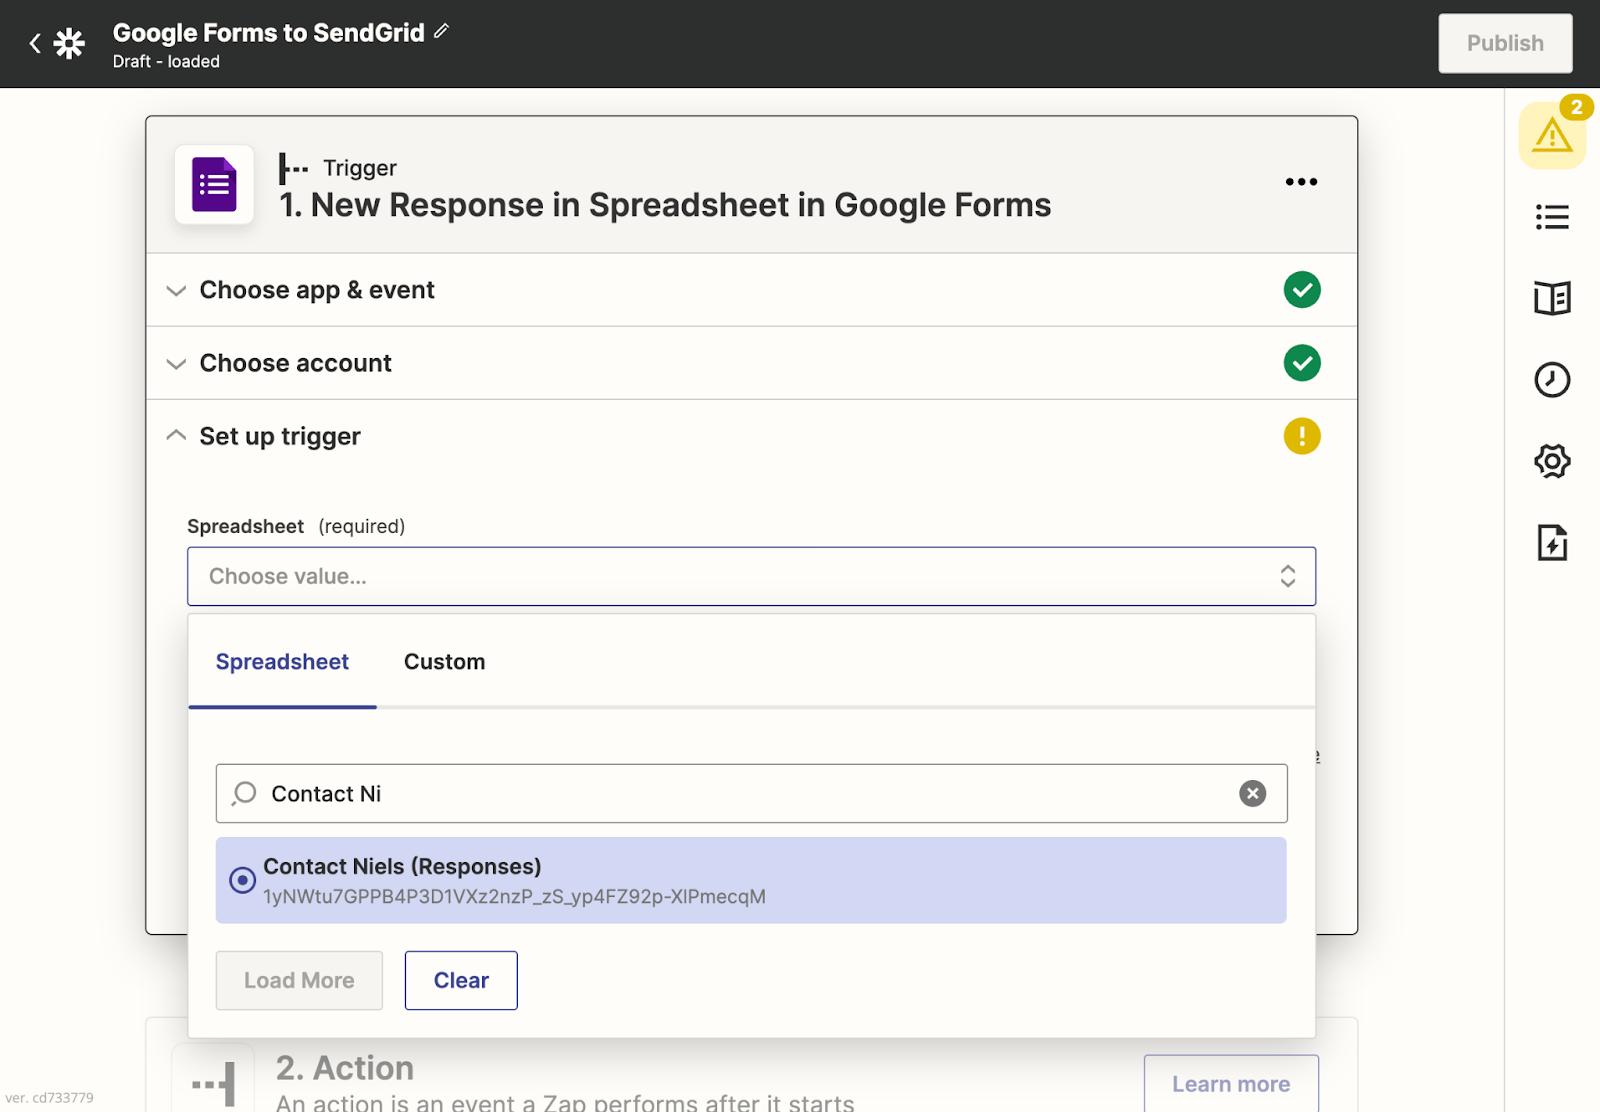 User selects the "Contact Niels (Responses)" option from the Spreadsheet dropdown for the Google Forms trigger in Zapier.